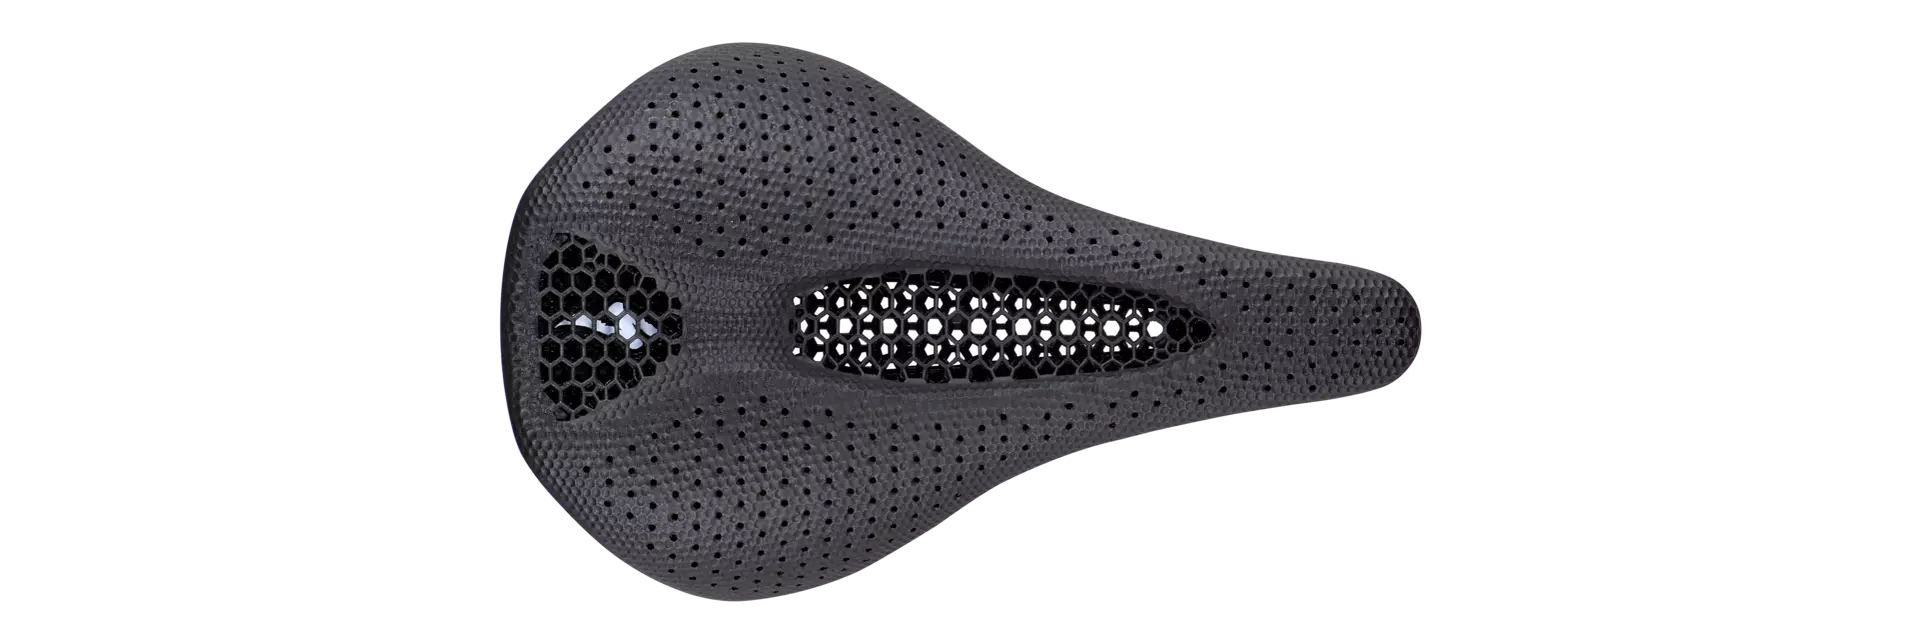 Specialized Power Pro Mirror Saddle with Mirror Padding — Clubhaus